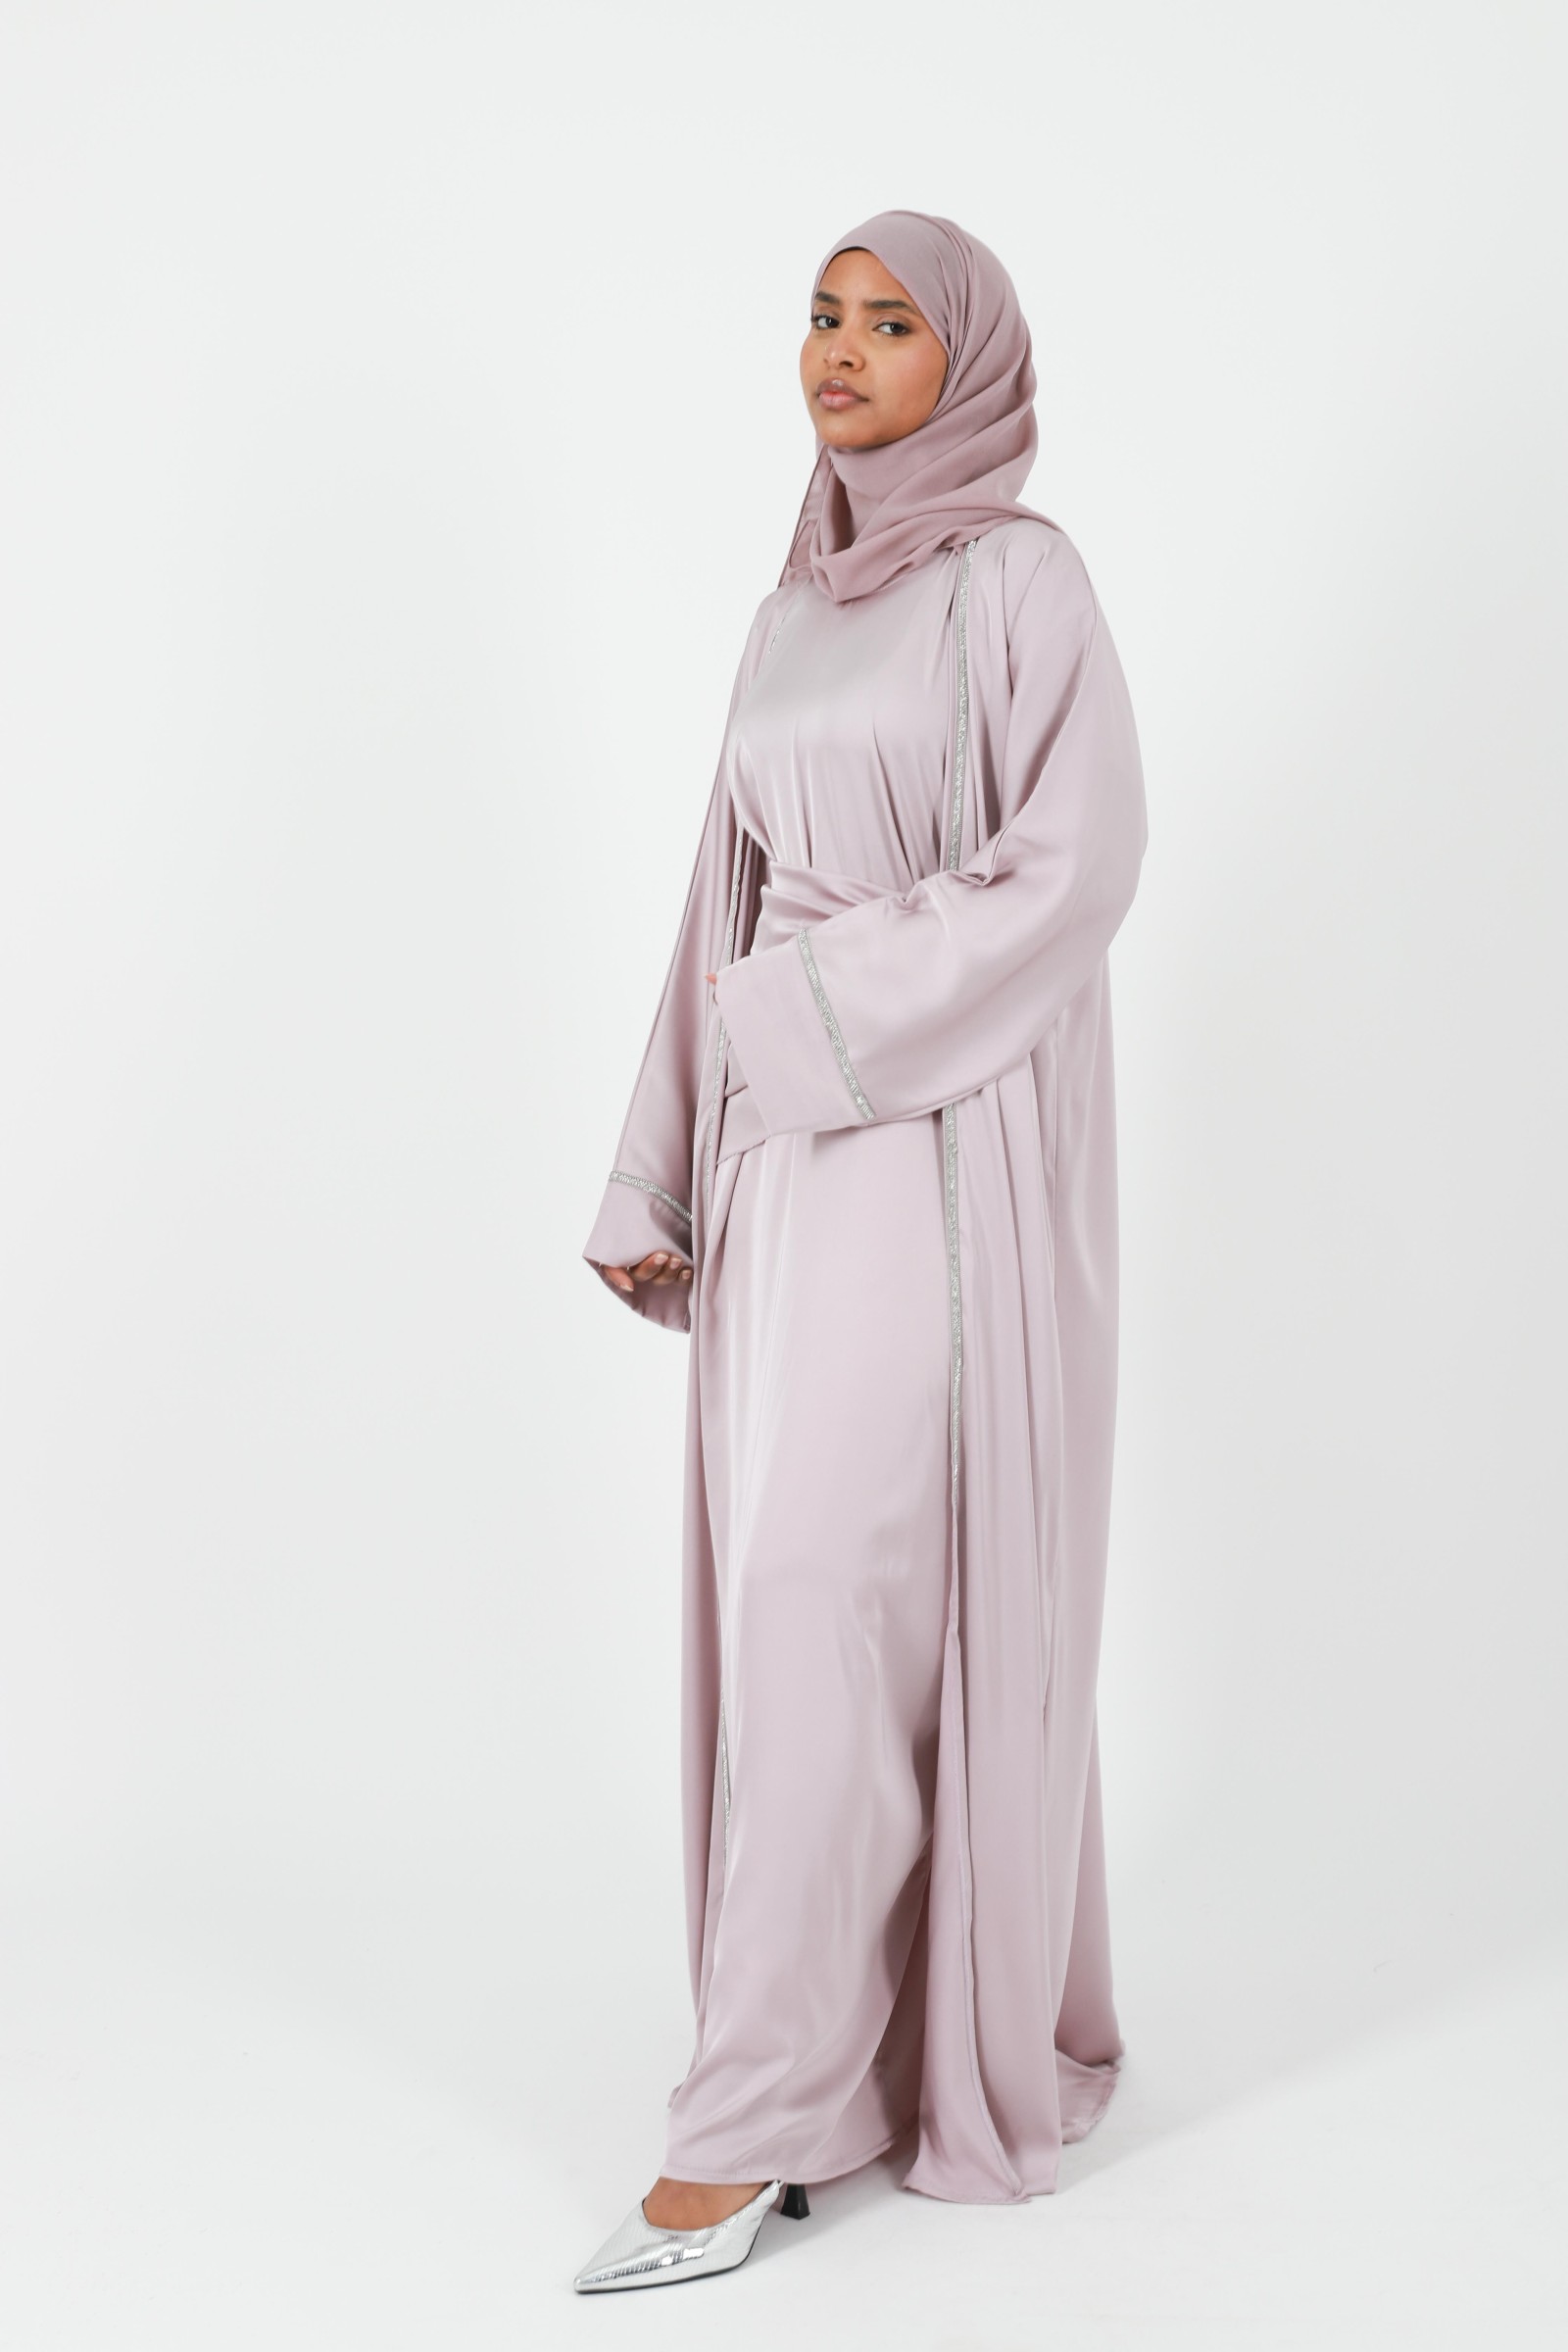 Abaya dubai party outfit for modest and elegant Muslim women